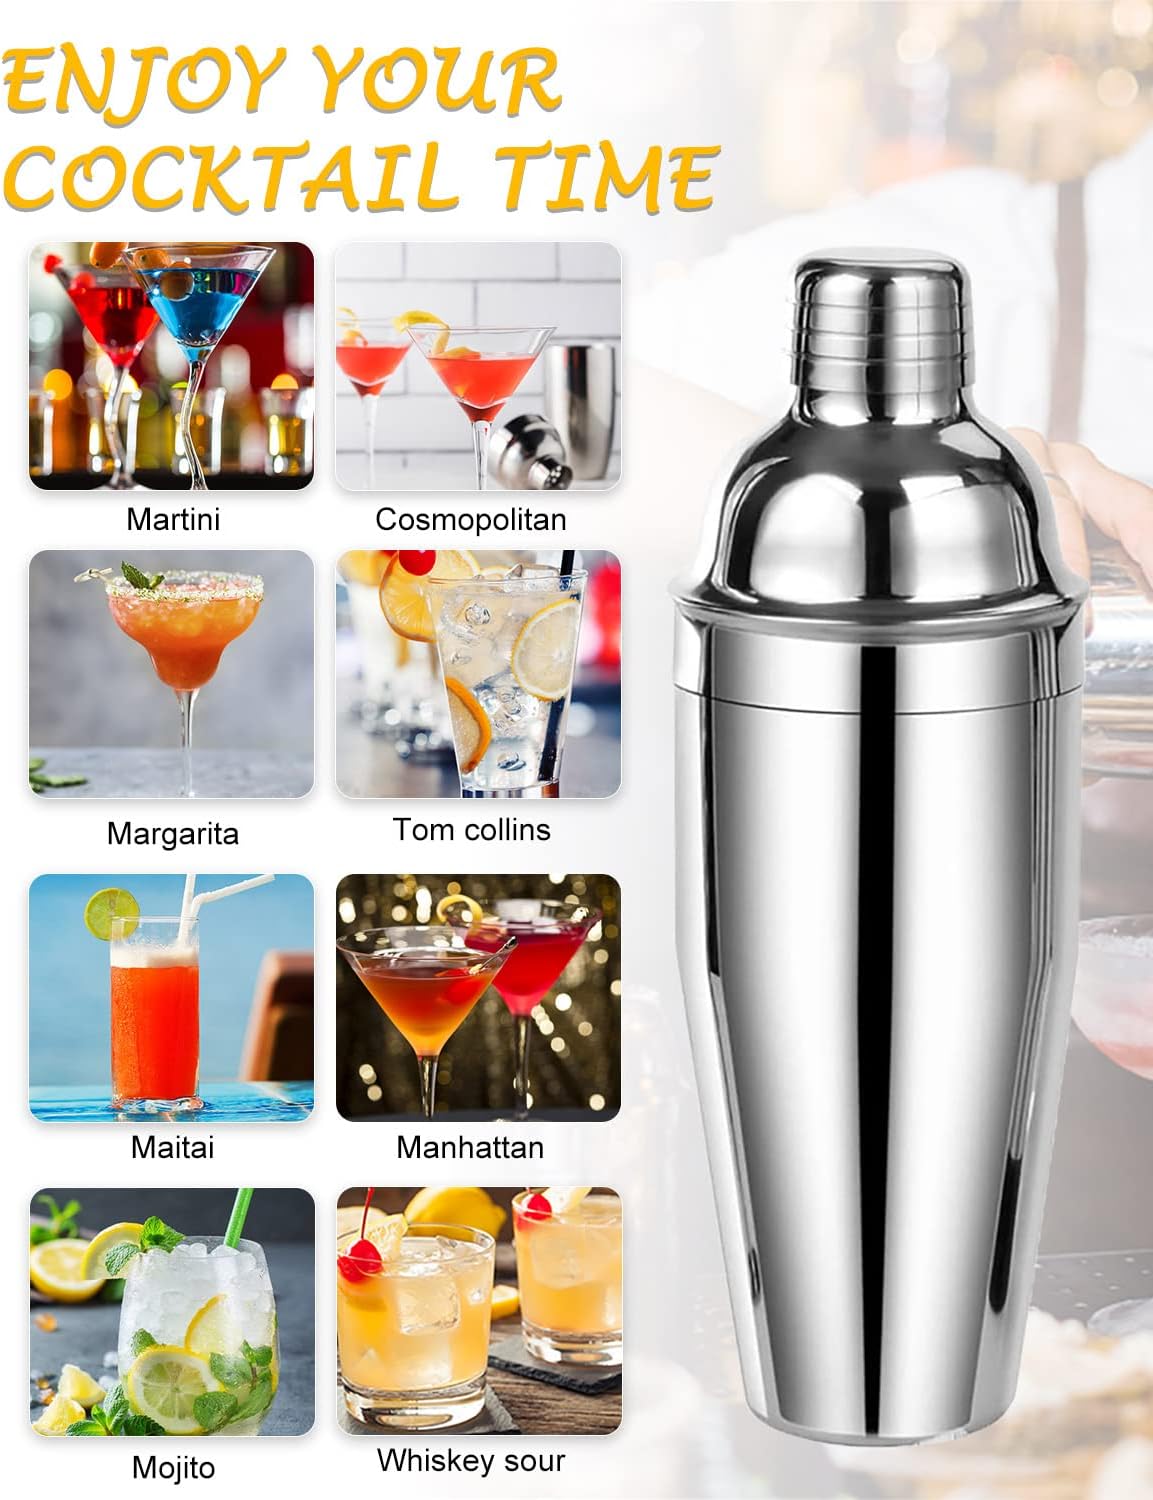 LIVEHITOP Cocktail Making Set, 9Pcs Stainless Steel Bartender Kit Professional Cocktail Shaker Set with 750ML Boston Shaker for Home, Bar, Party